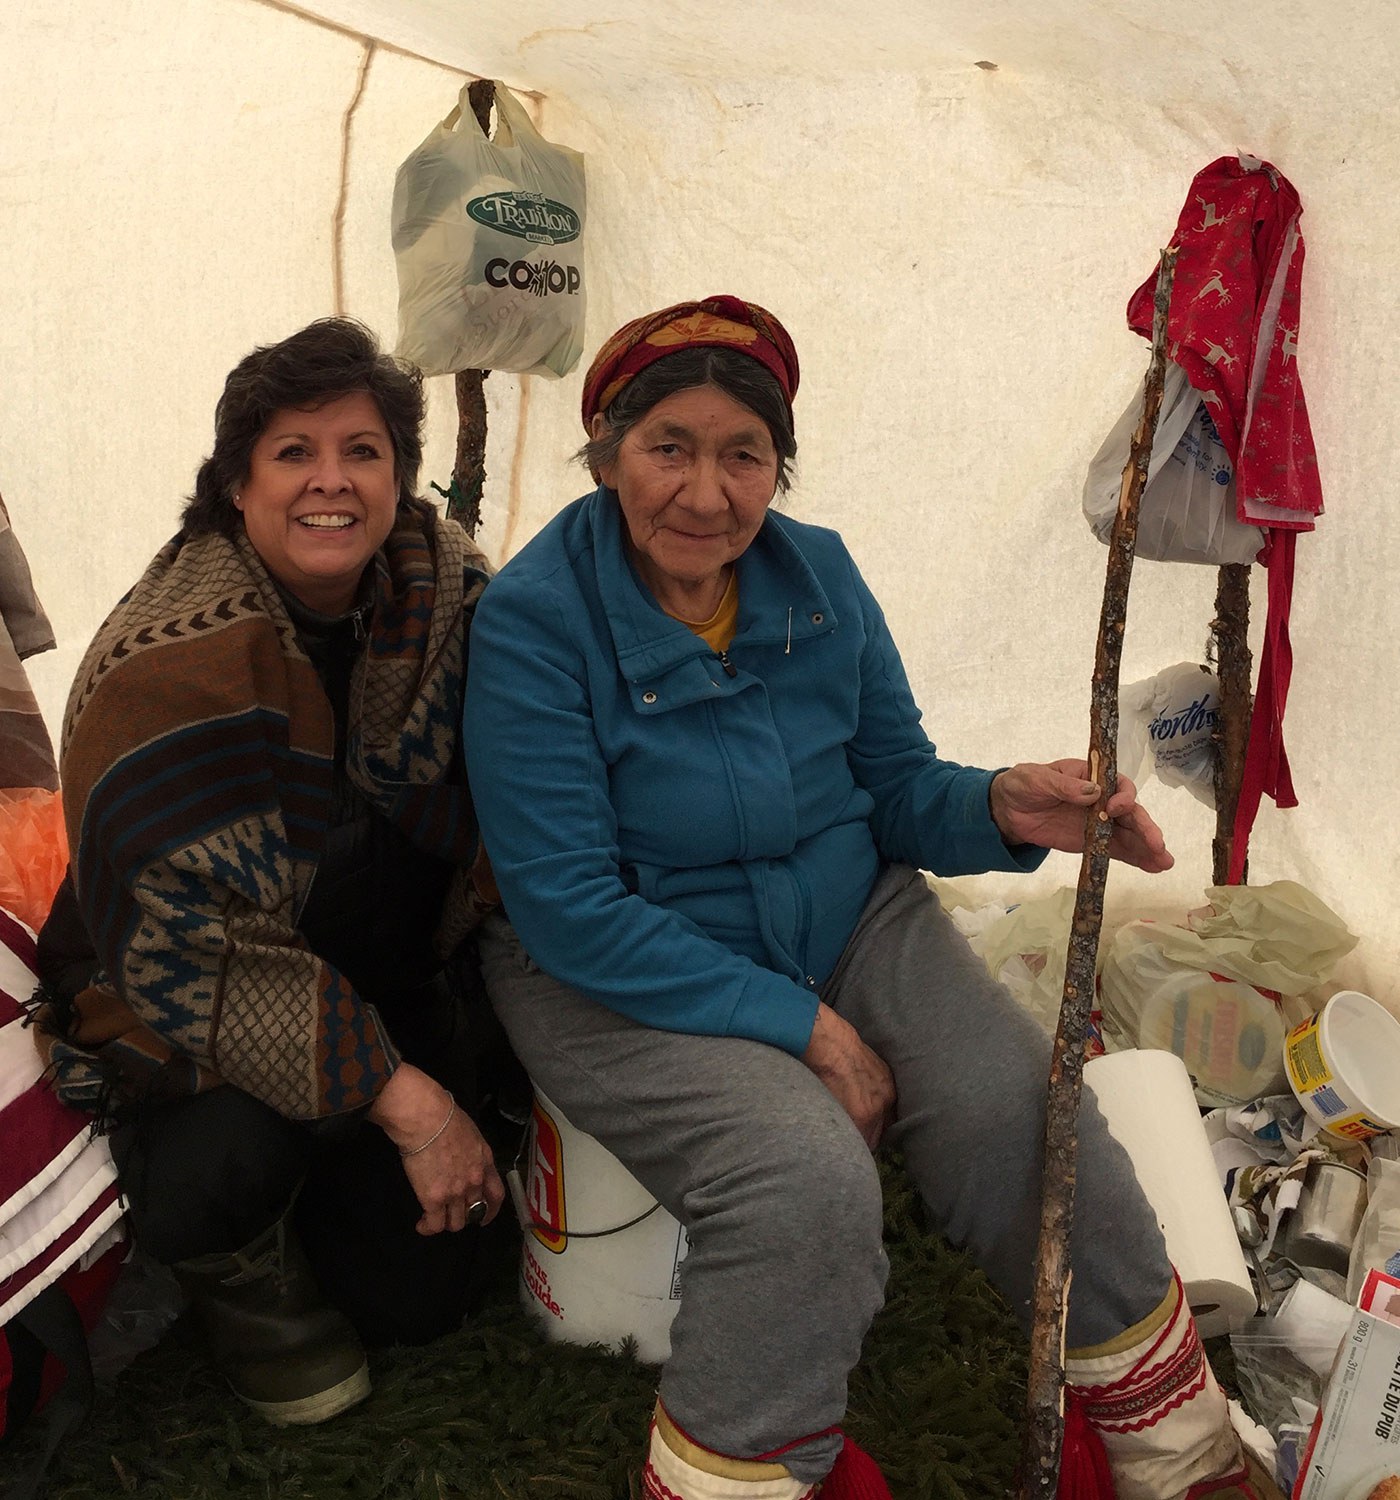 Dr. Wesley-Esquimaux (left) with Elizabeth Penashue, who was born into an Innu hunting and trapping family that lived at Kanekuanikat, between Esker and Churchill Falls, Labrador. Penashue moved to Sheshatshiu in the 1960s when her family and her people were encouraged to relocate in order to integrate them into Canadian society through education and a more settled lifestyle. Photo courtesy of the author.